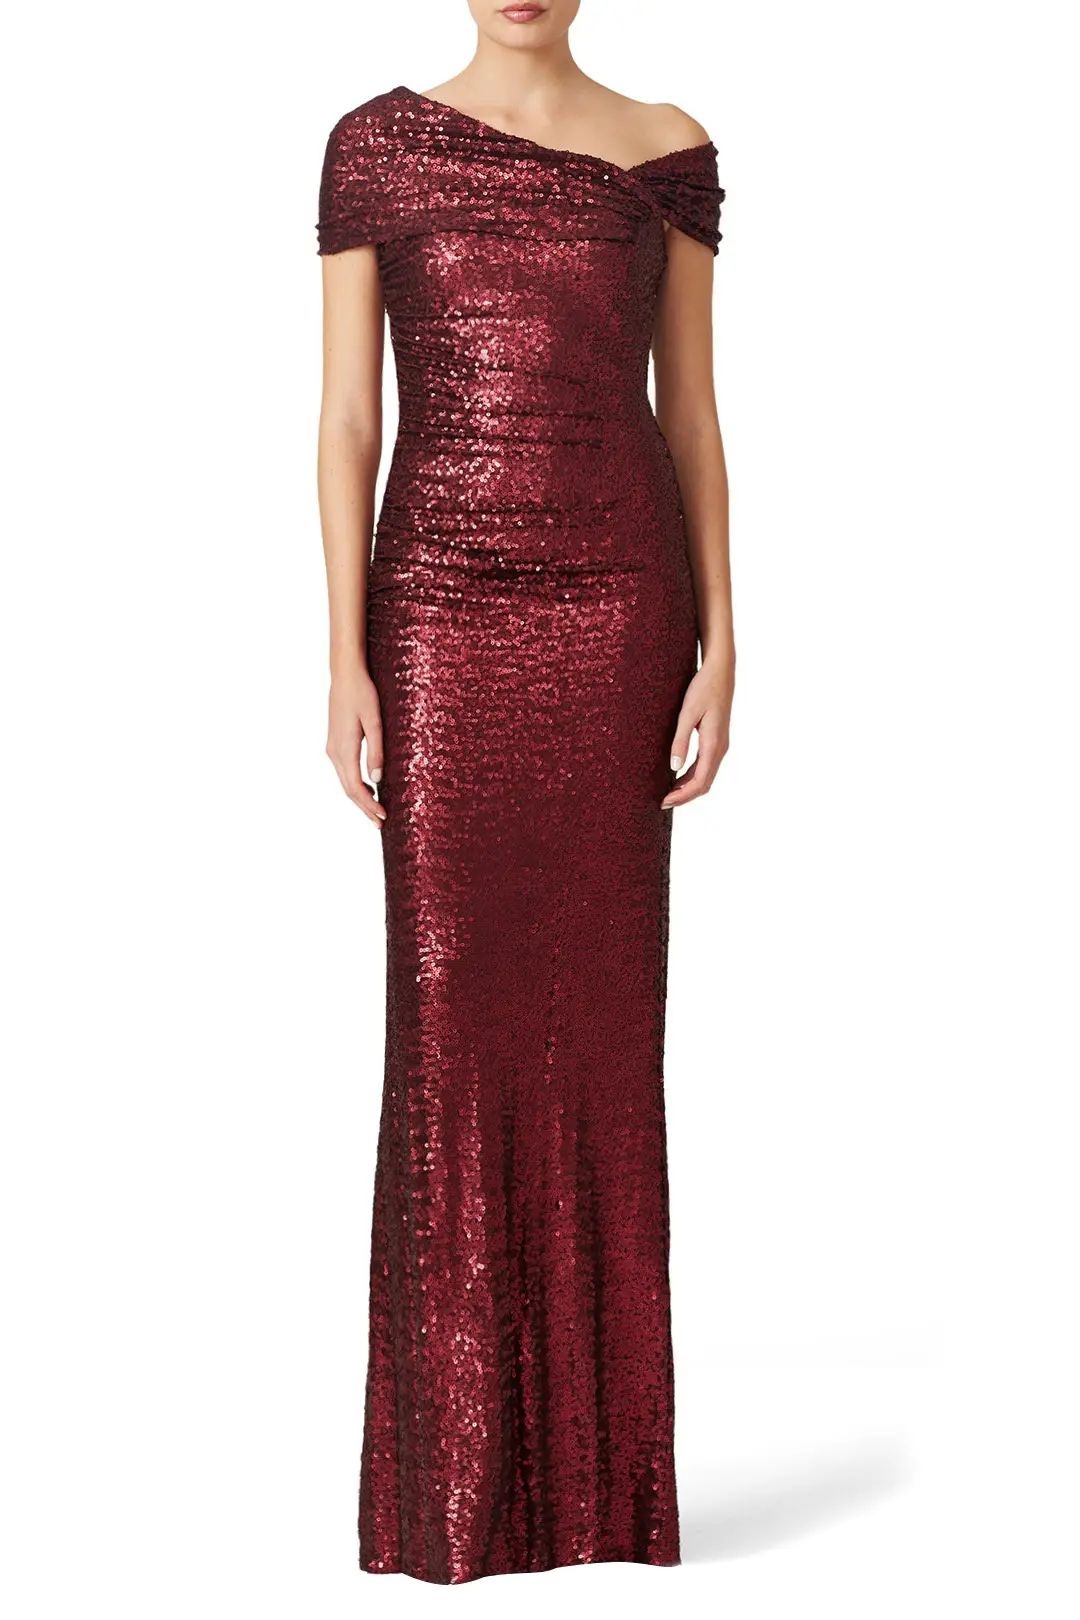 Bordeaux Samantha Gown | Rent the Runway